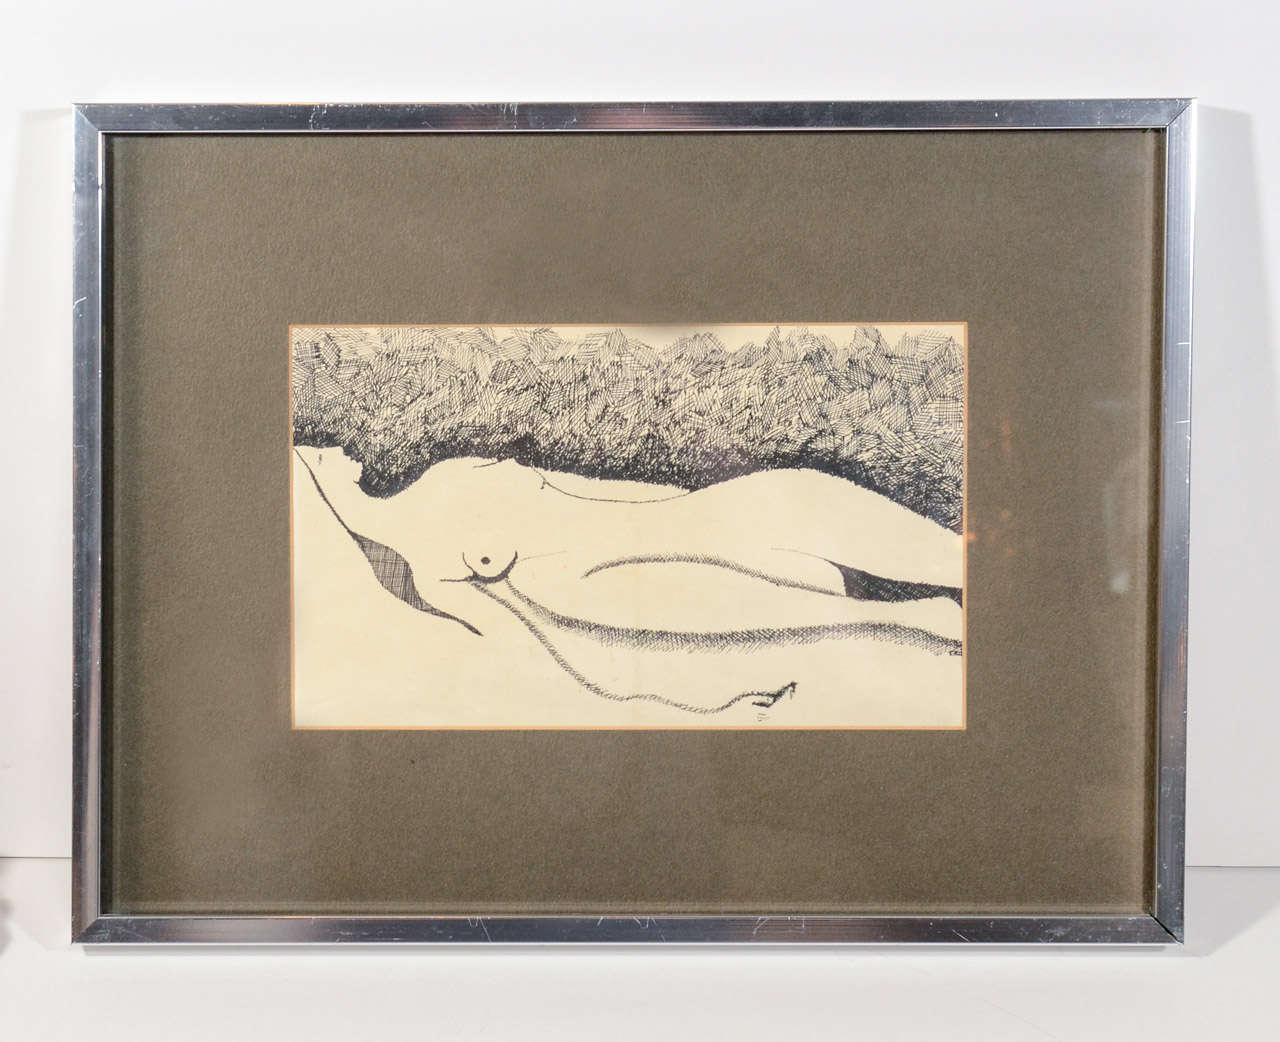 Beautifully conceived original ink sketch of female form. The sketch is comprised of a series of incredibly detailed sequences of short and diminutive lines or strokes. The lines in essence become the background and outline of the piece while the